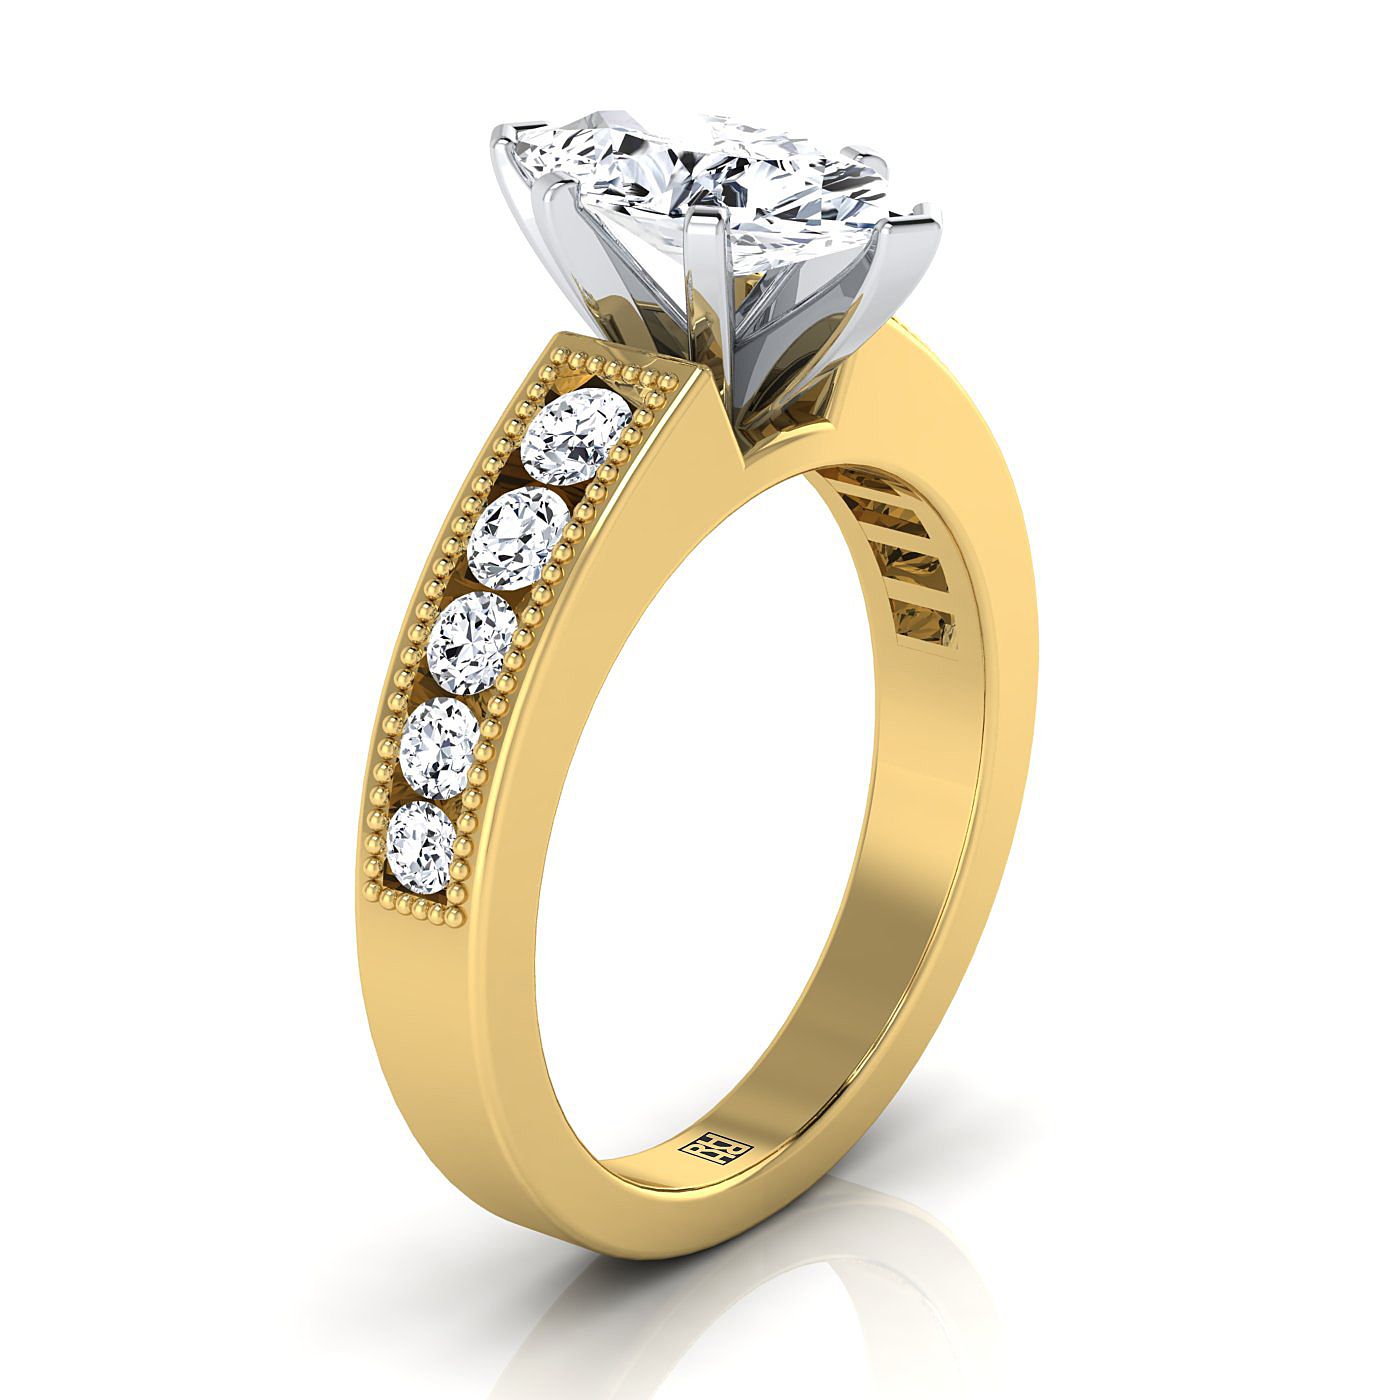 18K Yellow Gold Marquise  Diamond Antique Milgrain Bead and Channel Set Engagement Ring -1/2ctw